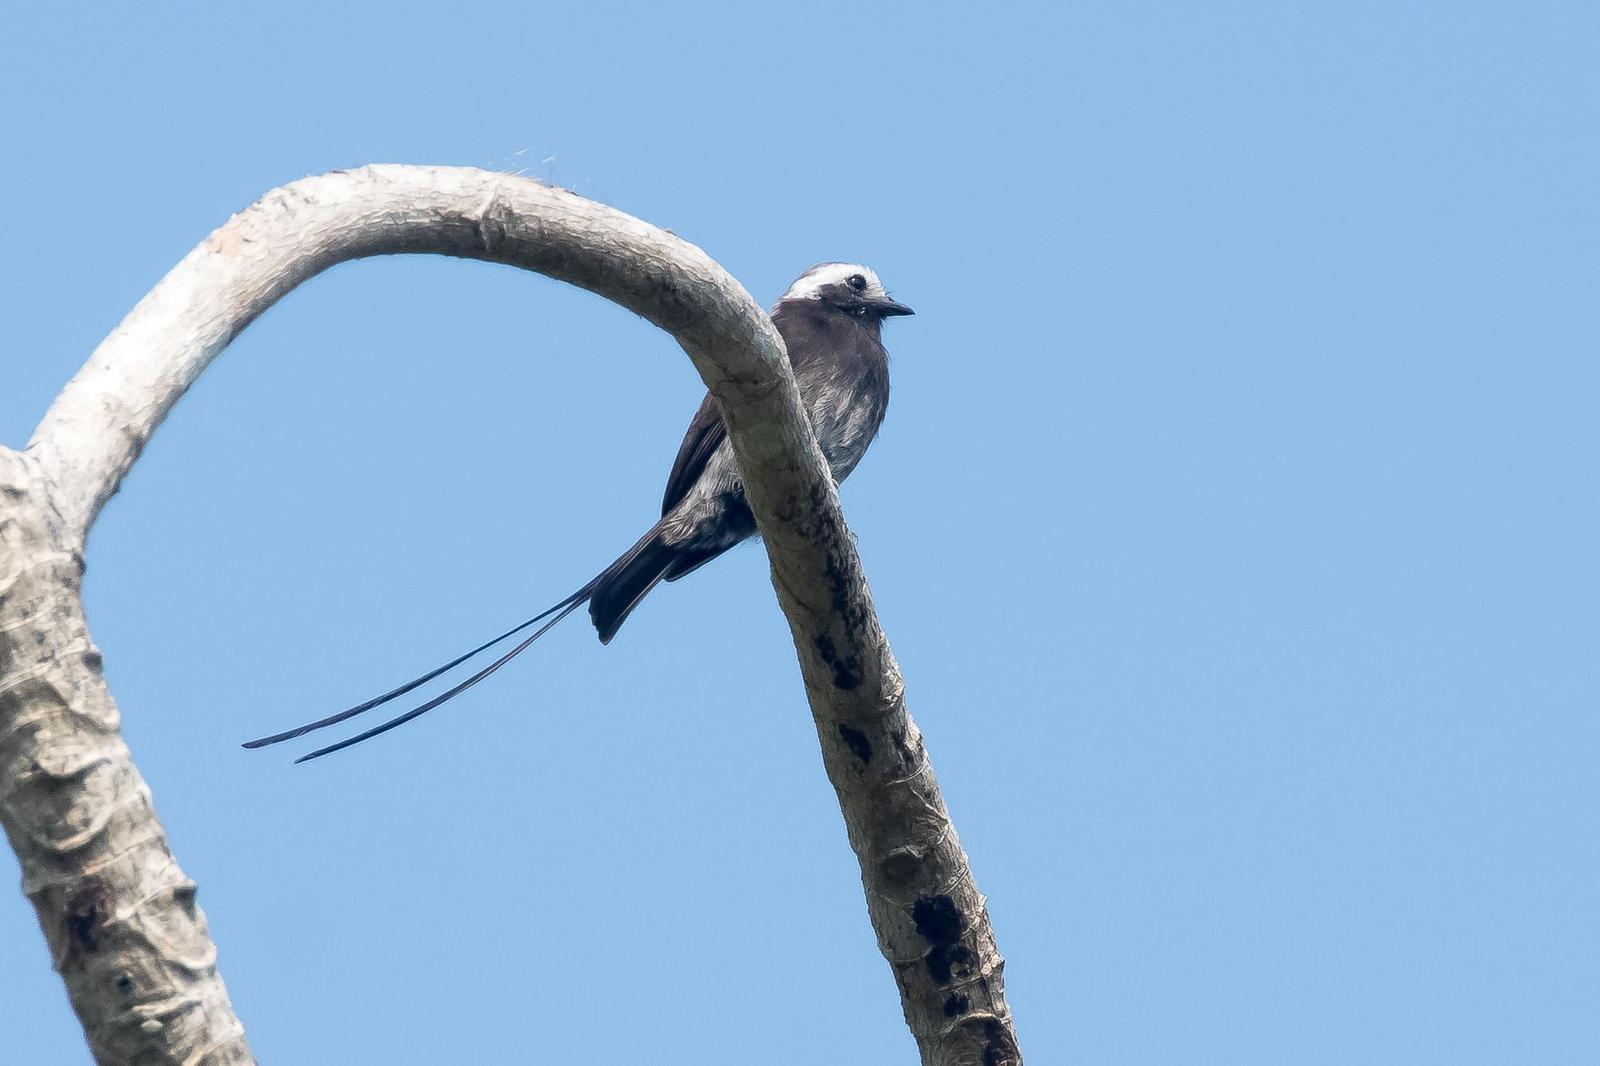 Long-tailed Tyrant Photo by Gerald Hoekstra